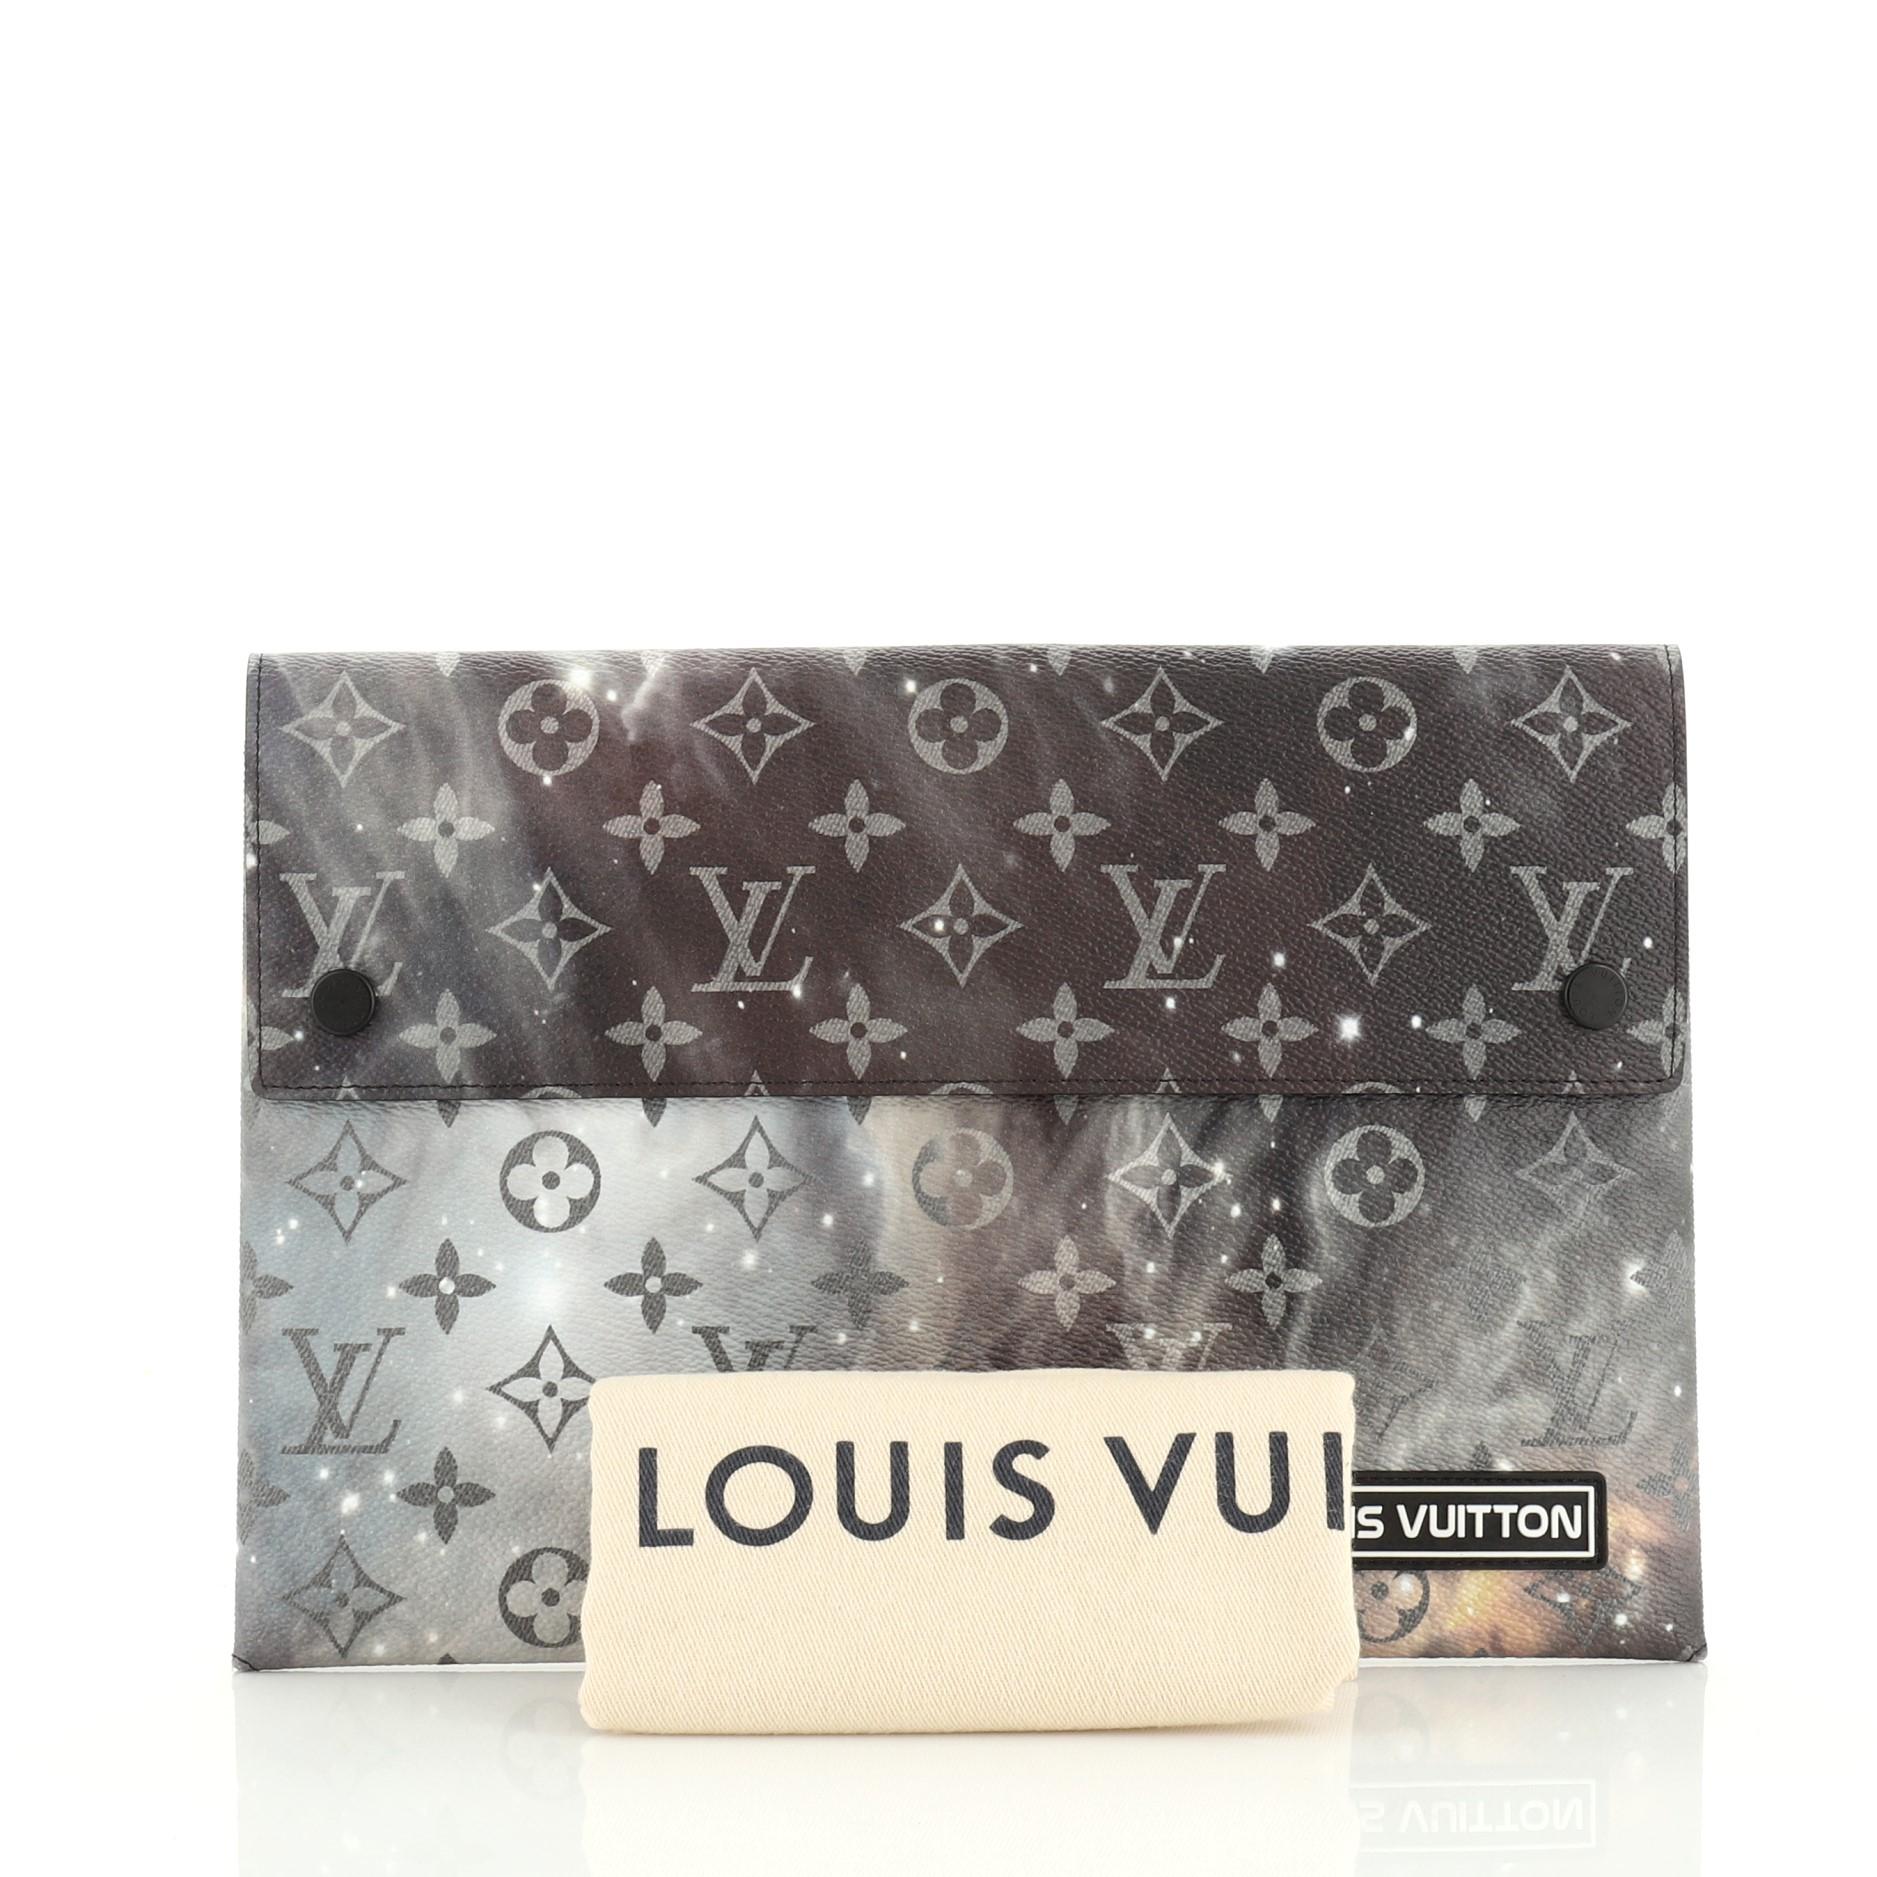 This Louis Vuitton Pochette Alpha Triple Limited Edition Monogram Galaxy Canvas, crafted from black and gray monogram galaxy coated canvas and black and silver-tone hardware. Its snap button closure opens to a black microfiber interior. Authenticity